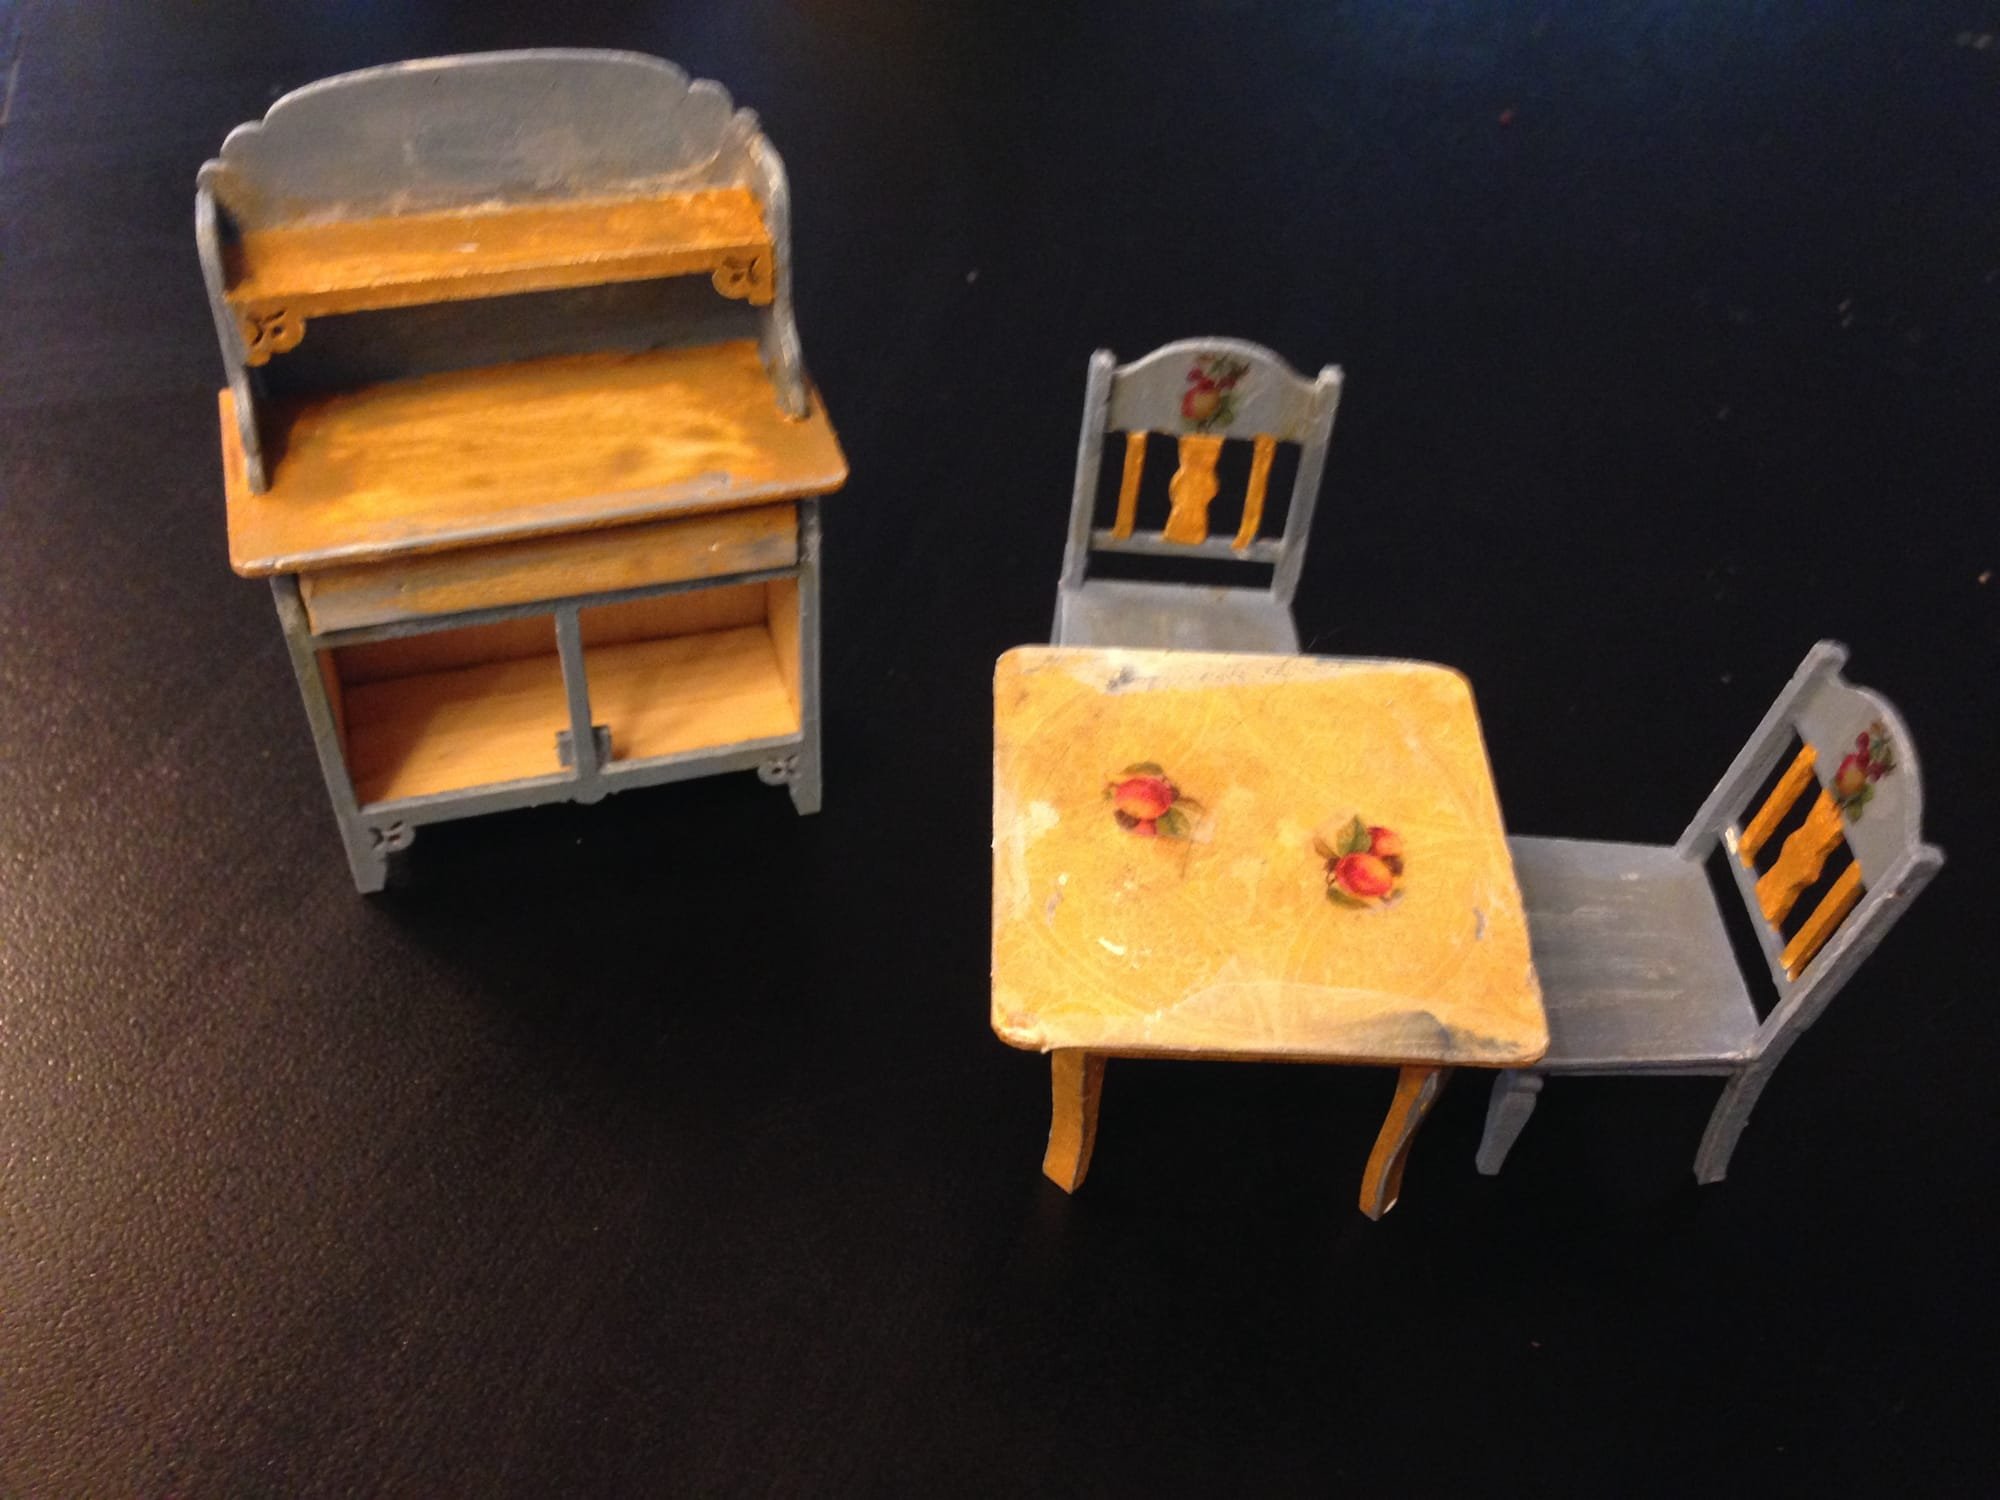 1:24th scale kichen pieces by Shannon May